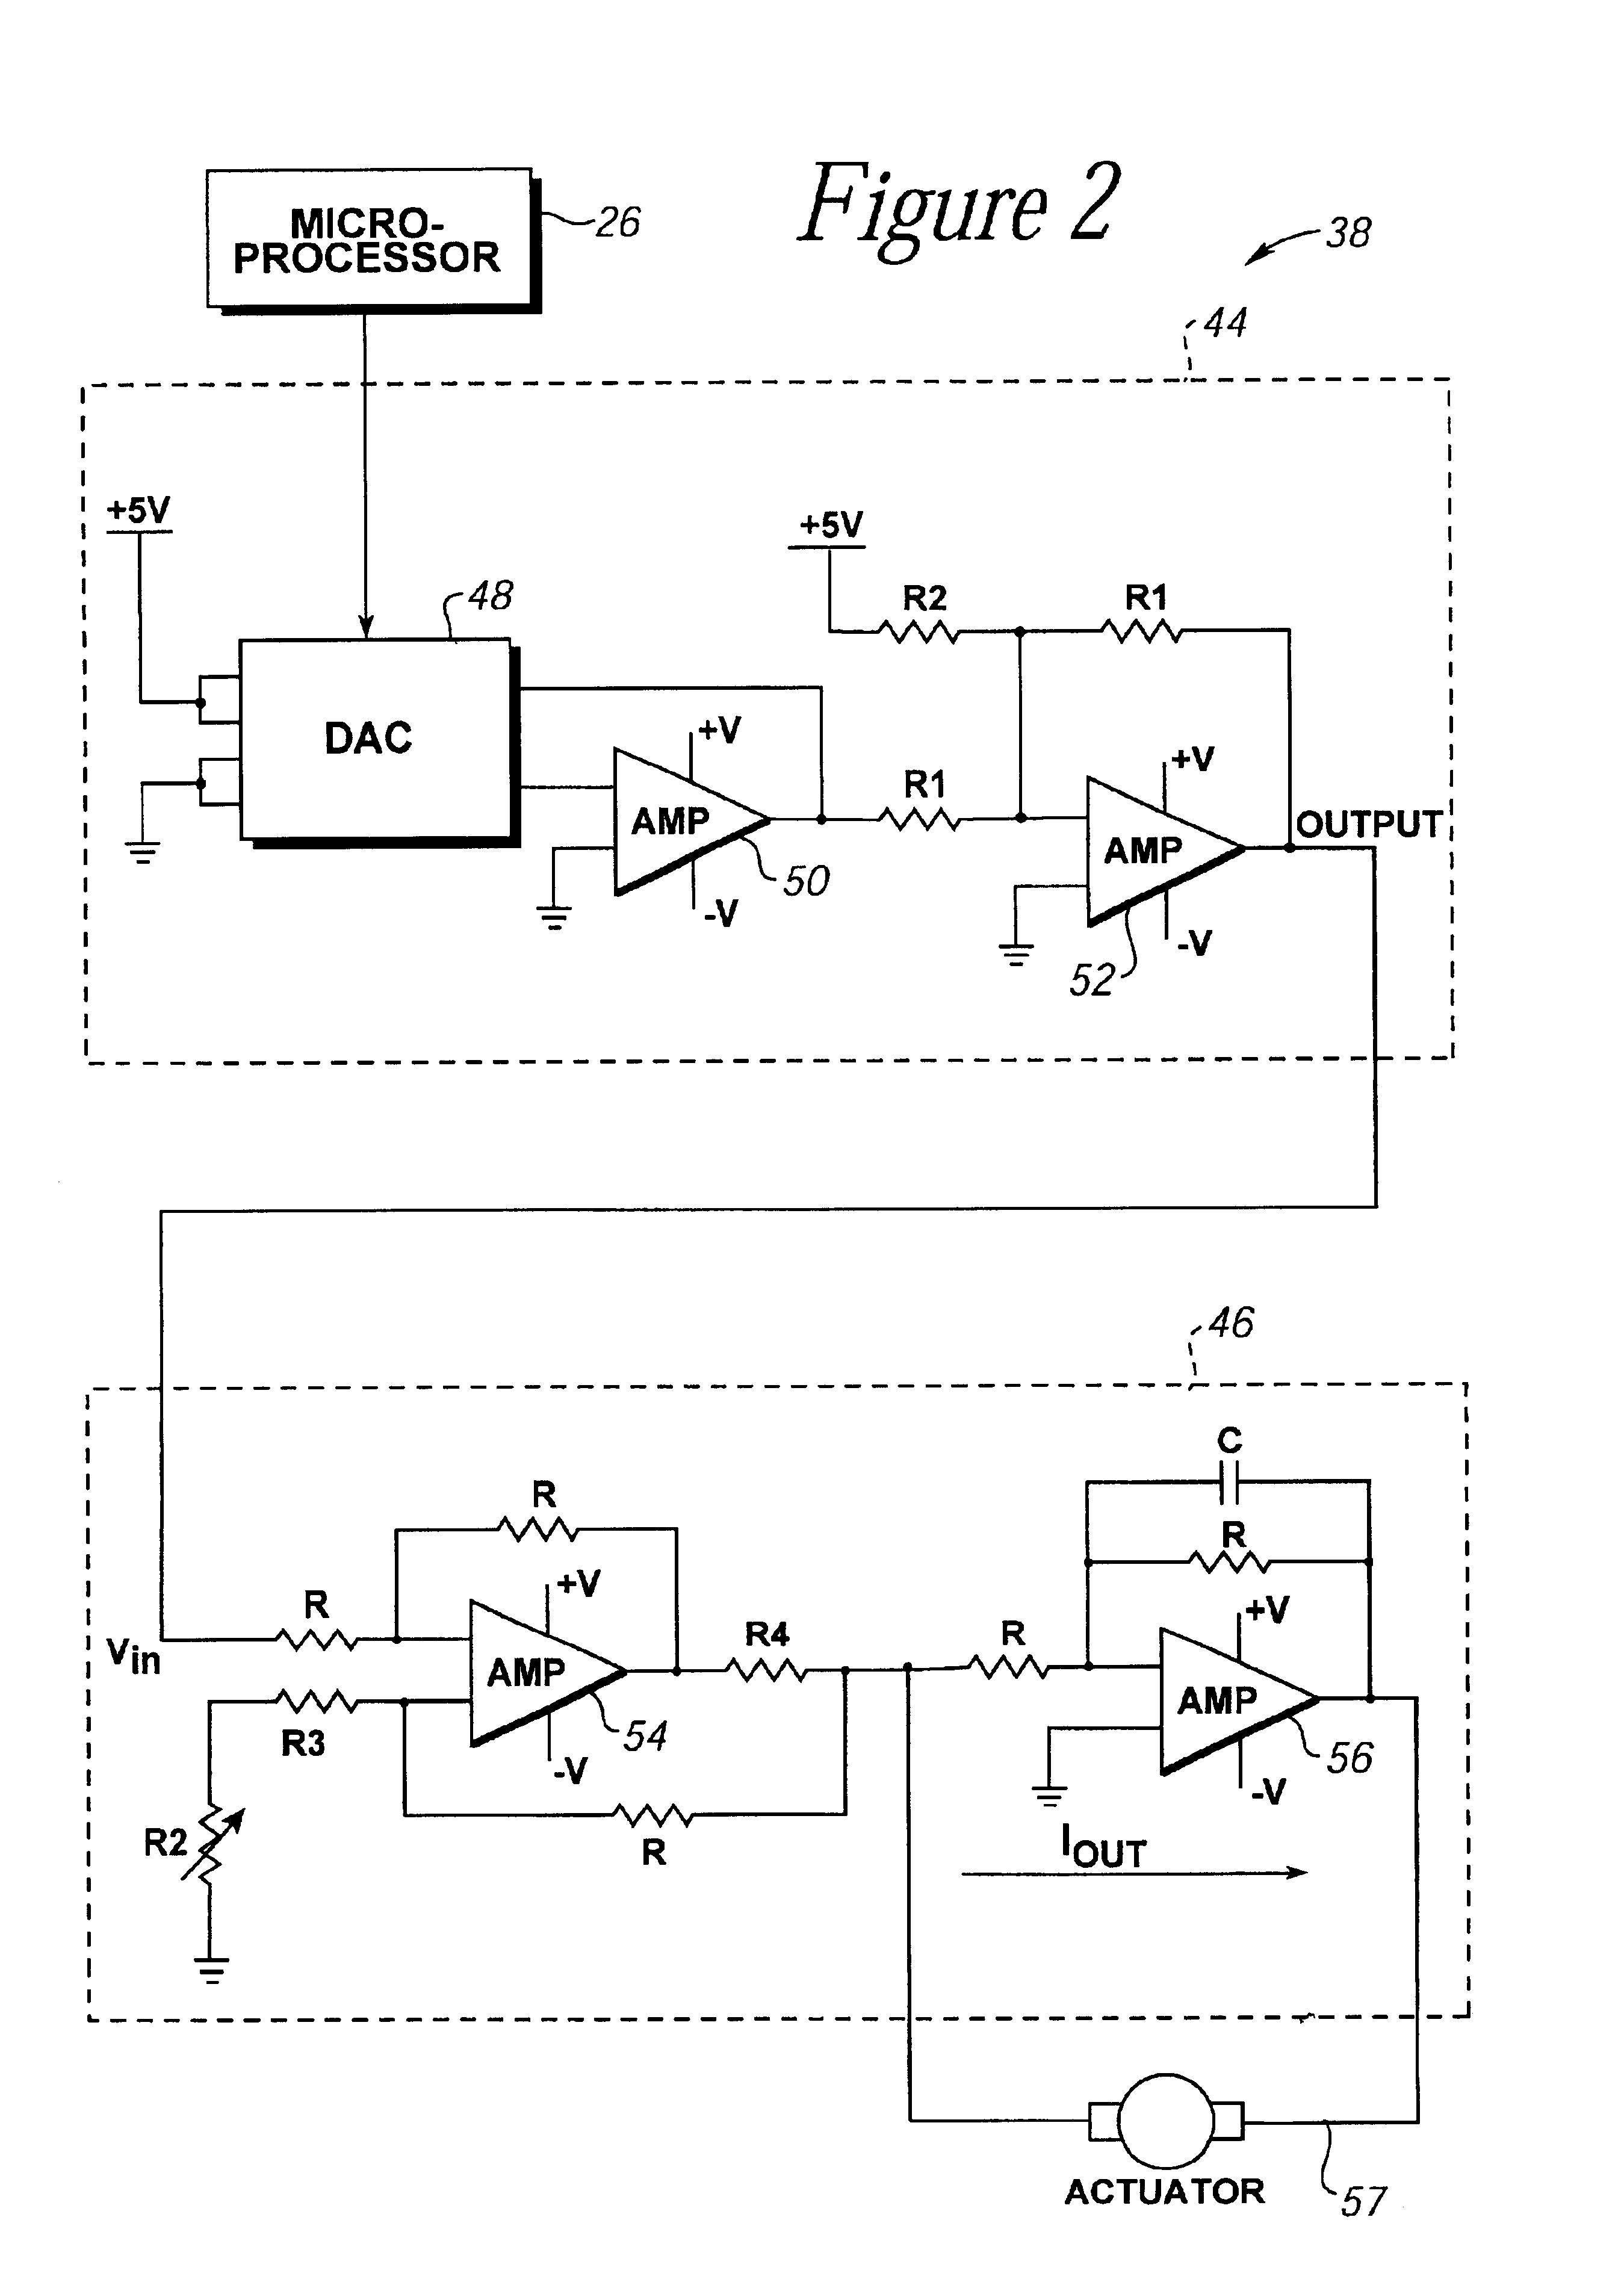 Force feedback device with microprocessor receiving low level commands